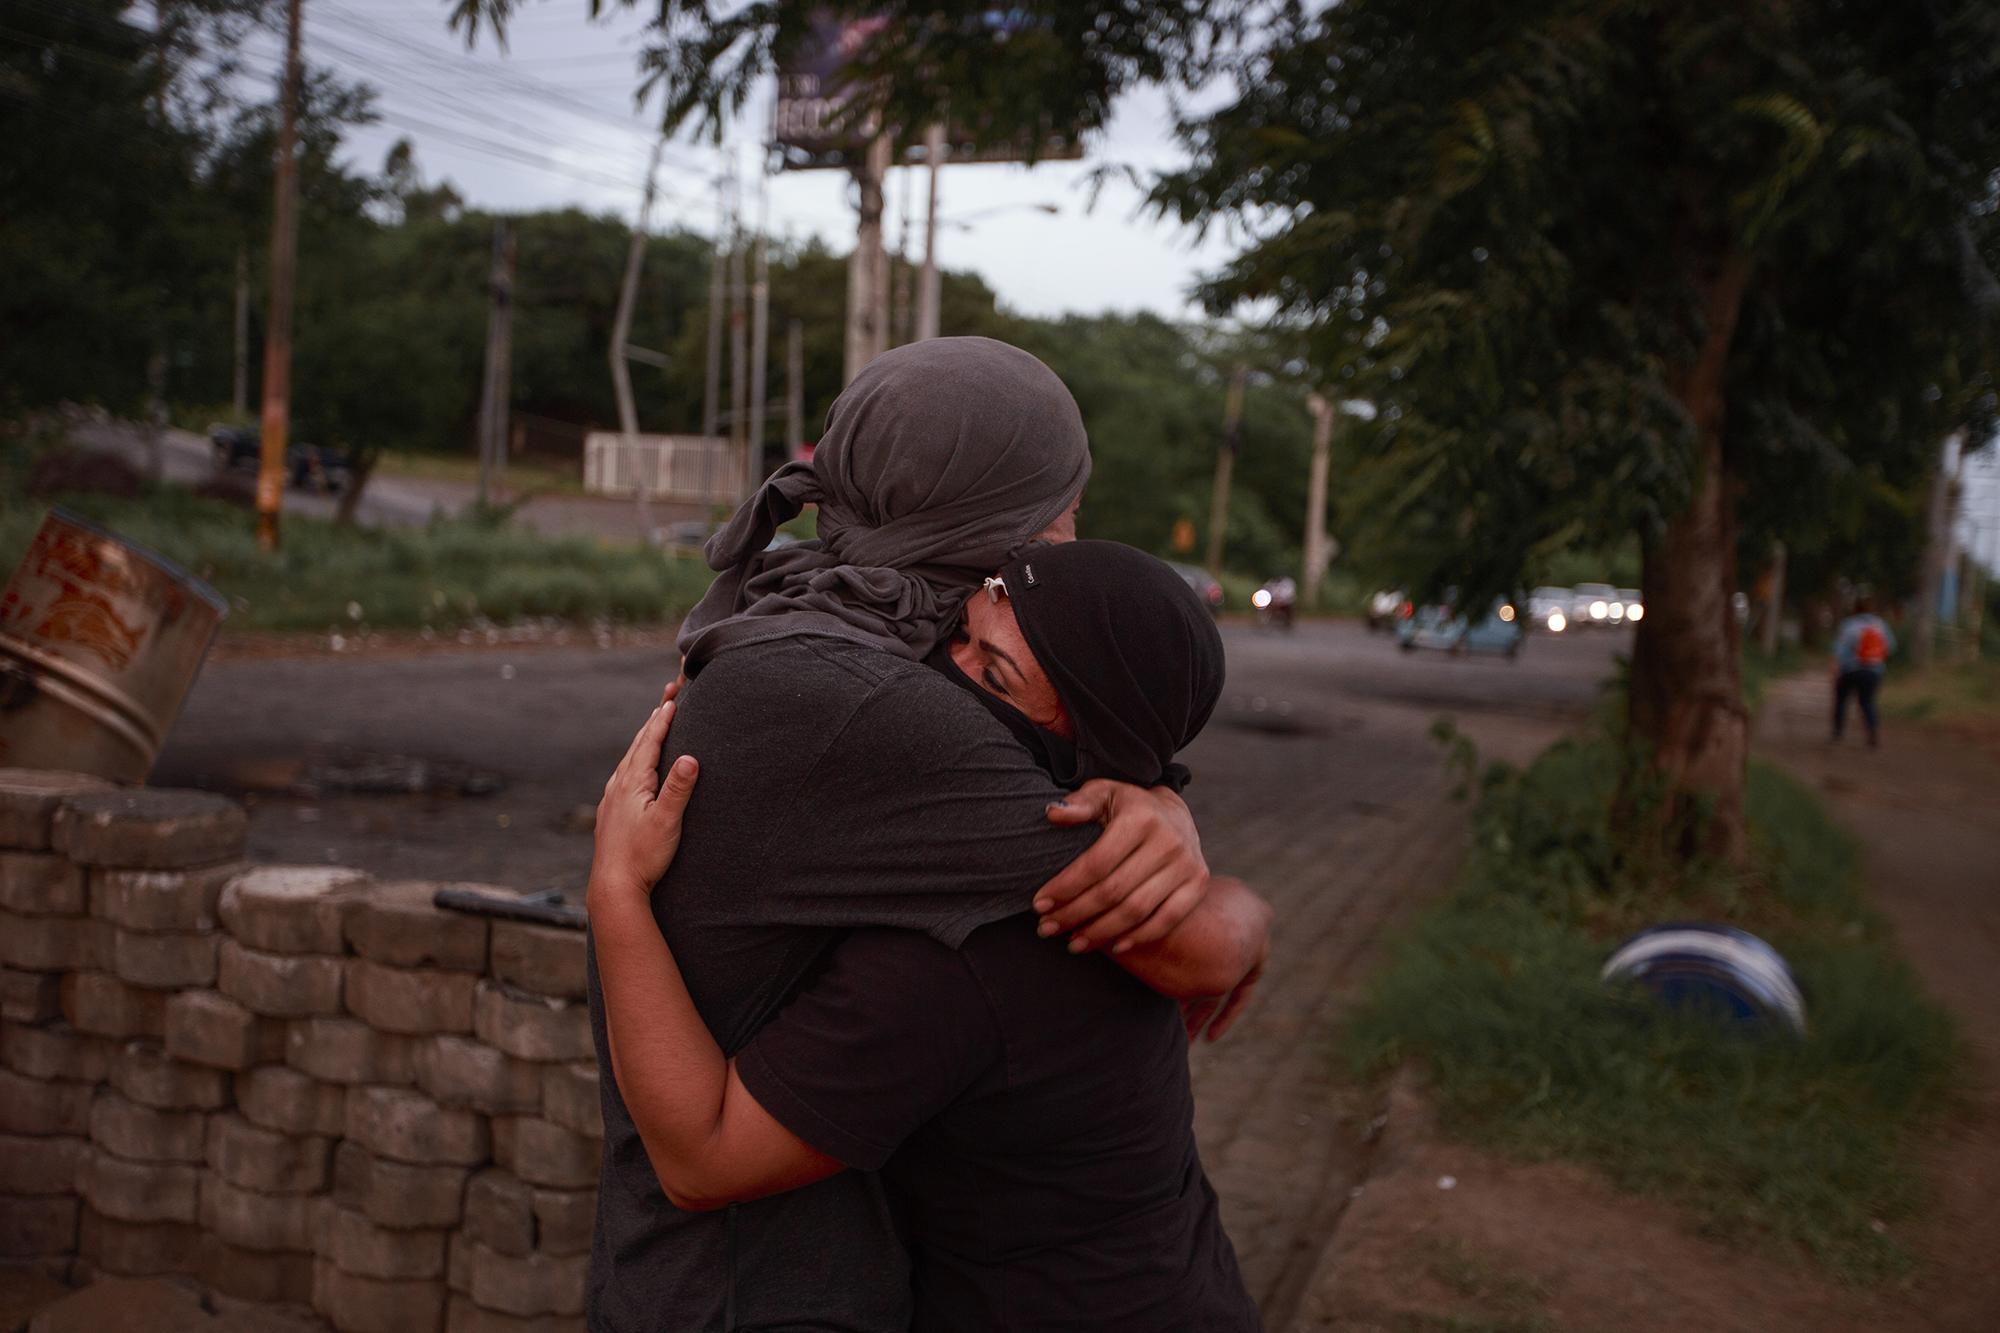 "Machete" and "Luna" embrace during their shift to stand guard at one of the barricades at the National University of Nicaragua. June 29, 2018.